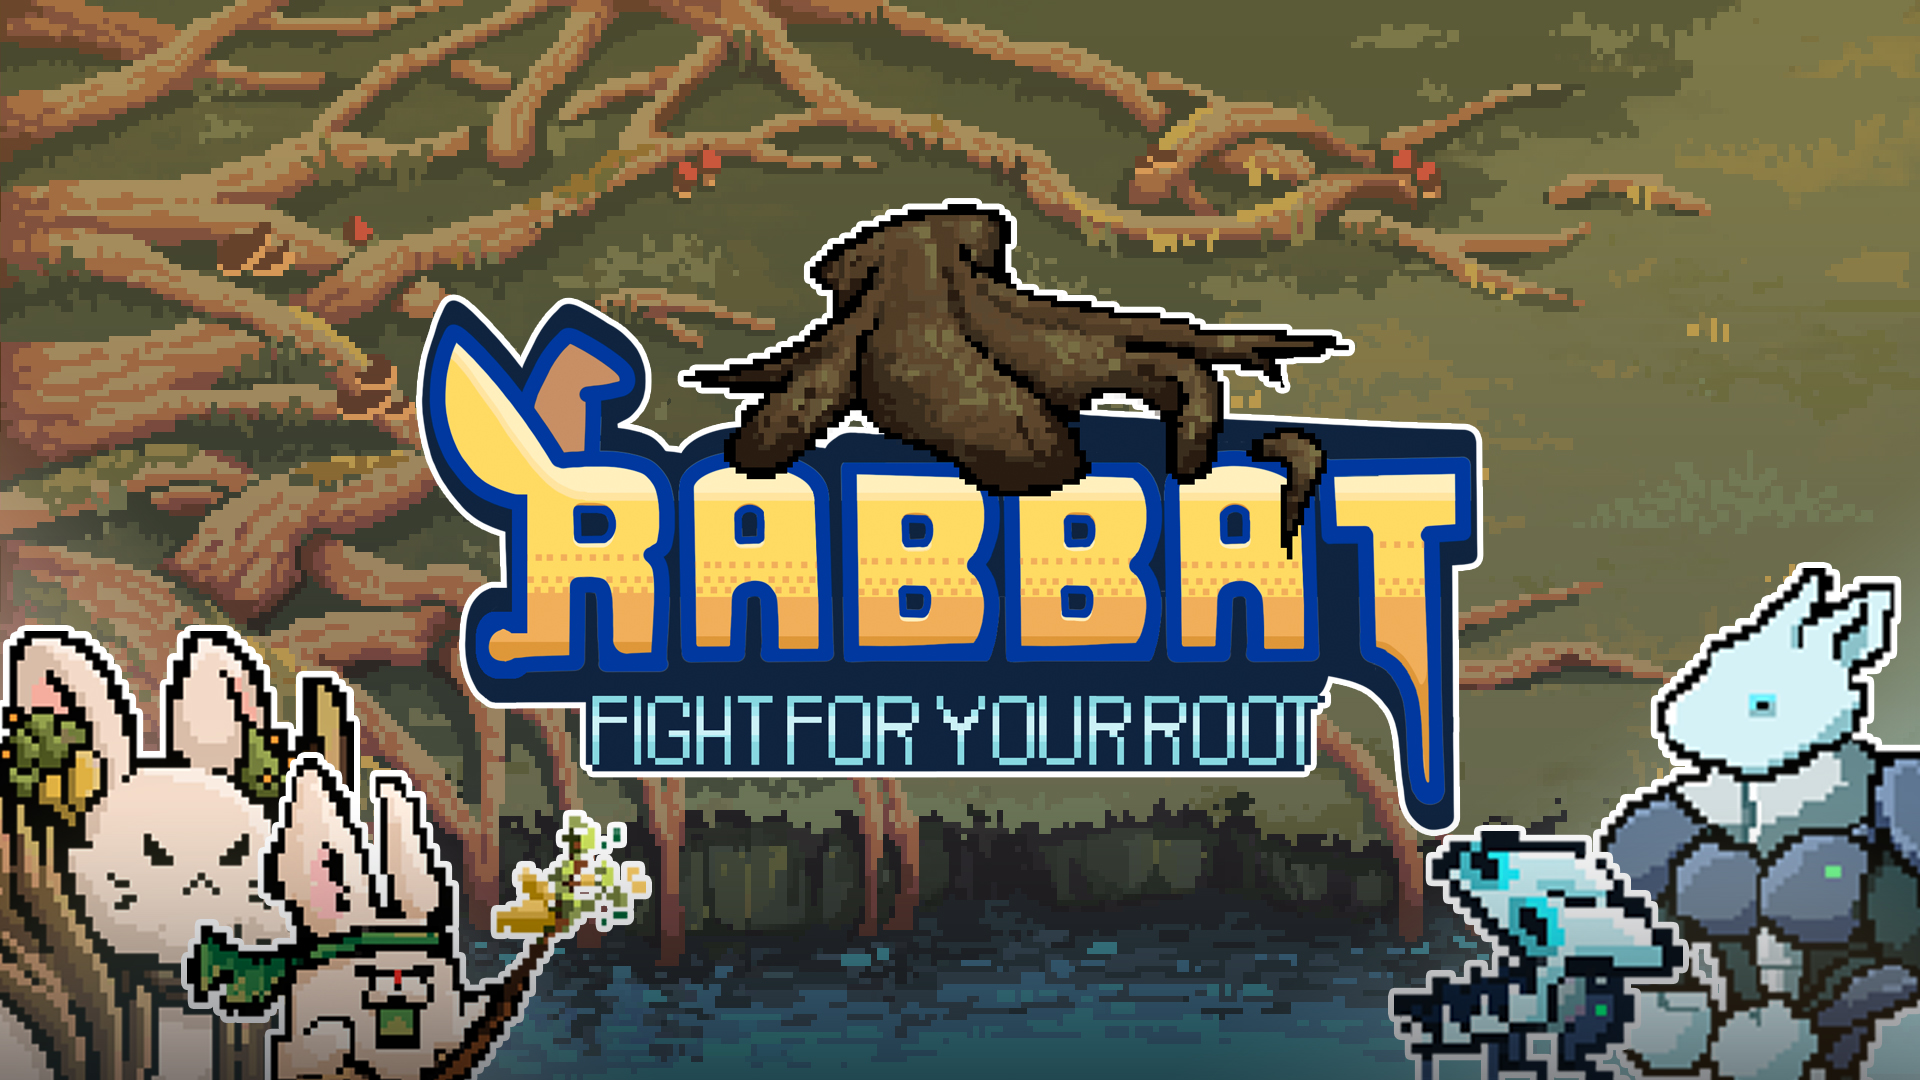 RABBAT fight for your root